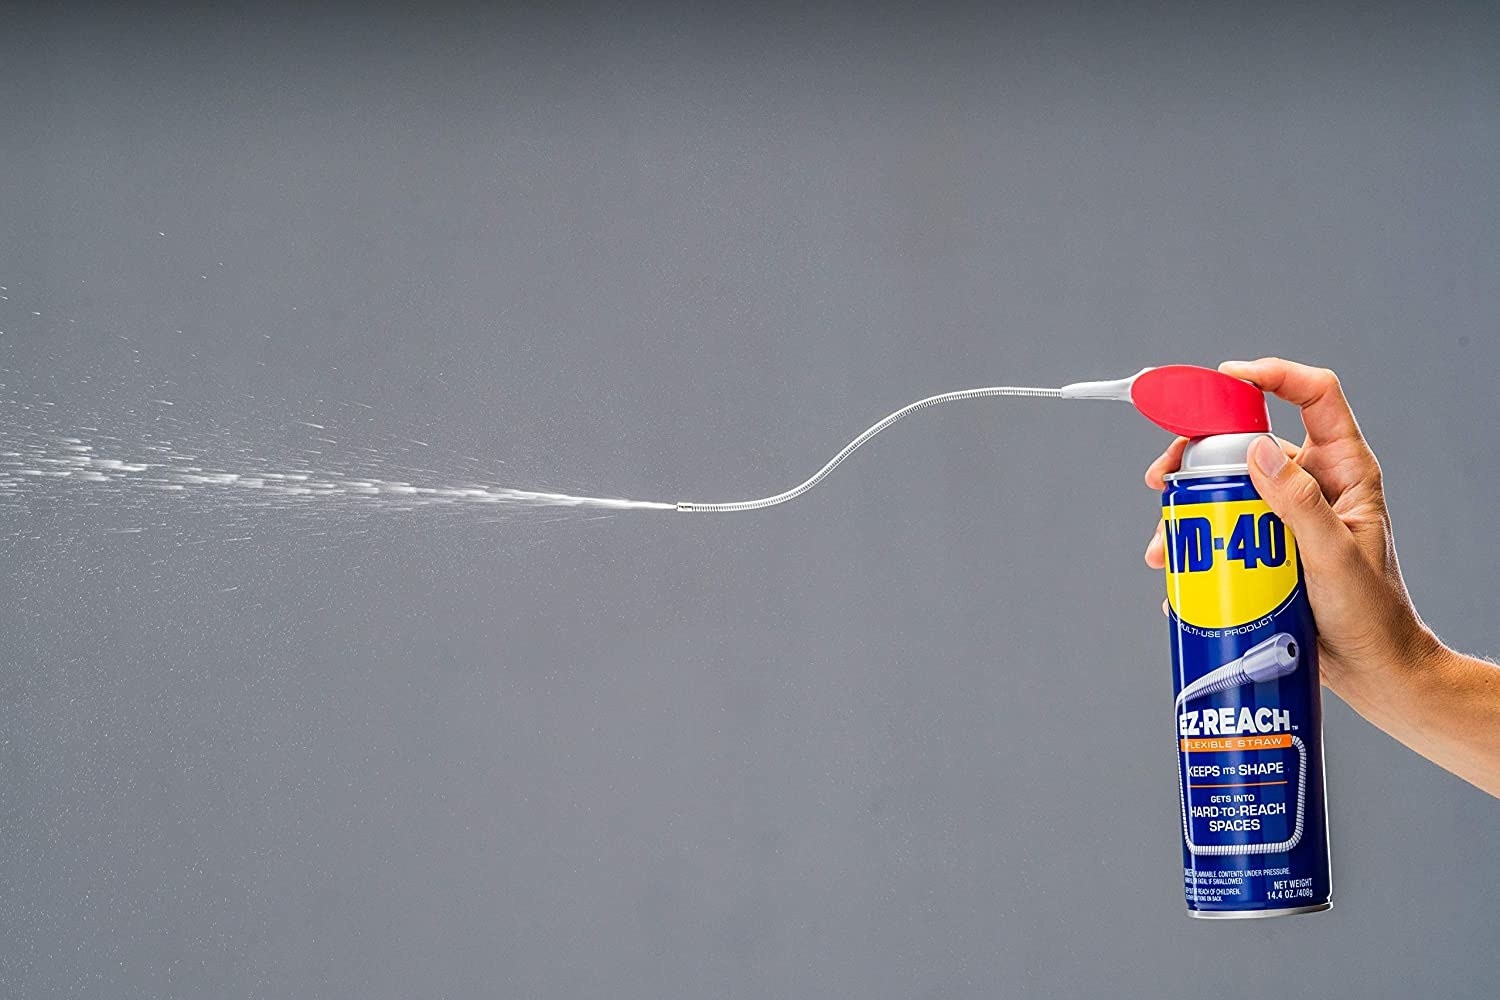 A model&#x27;s handing holding a can of WD-40 and spraying a stream of its contents